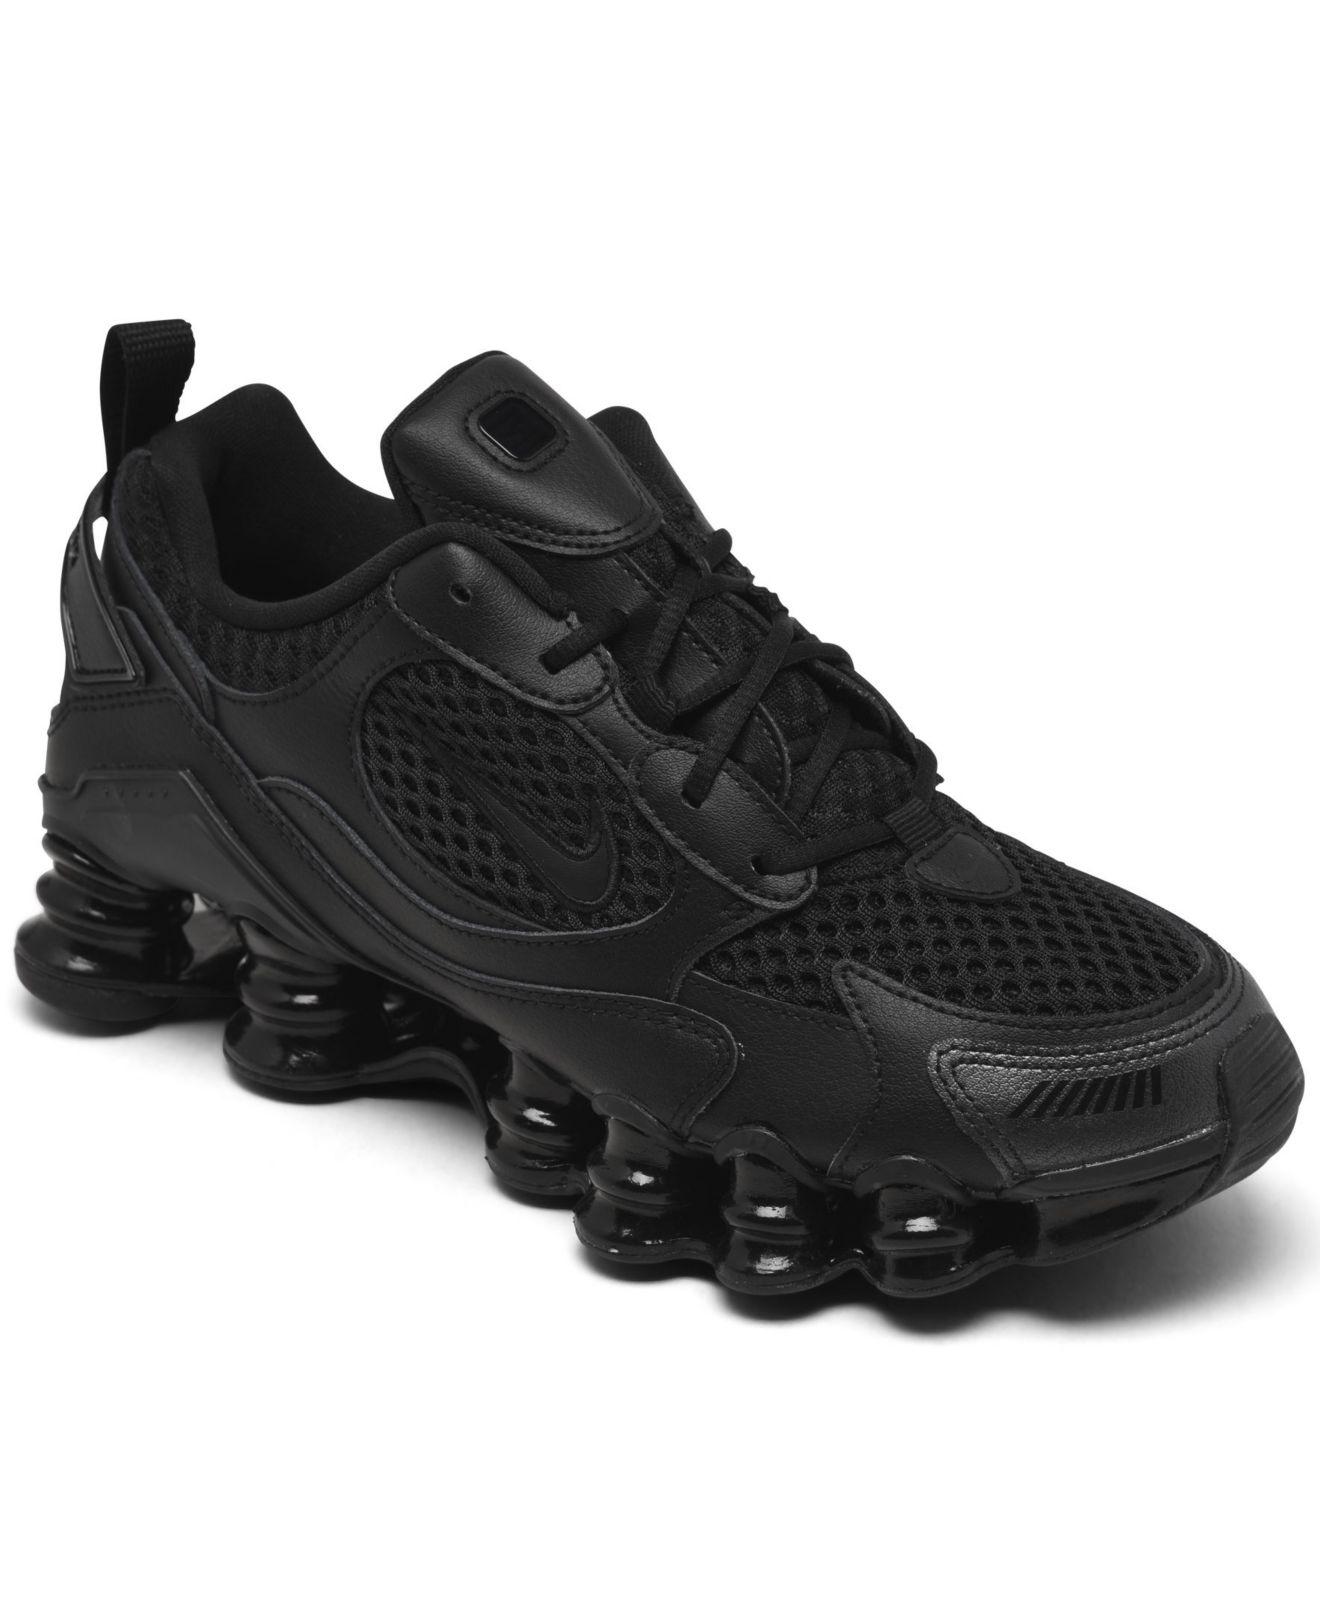 Nike Synthetic Shox Tl Nova 2 Casual Sneakers From Finish Line in Black ...